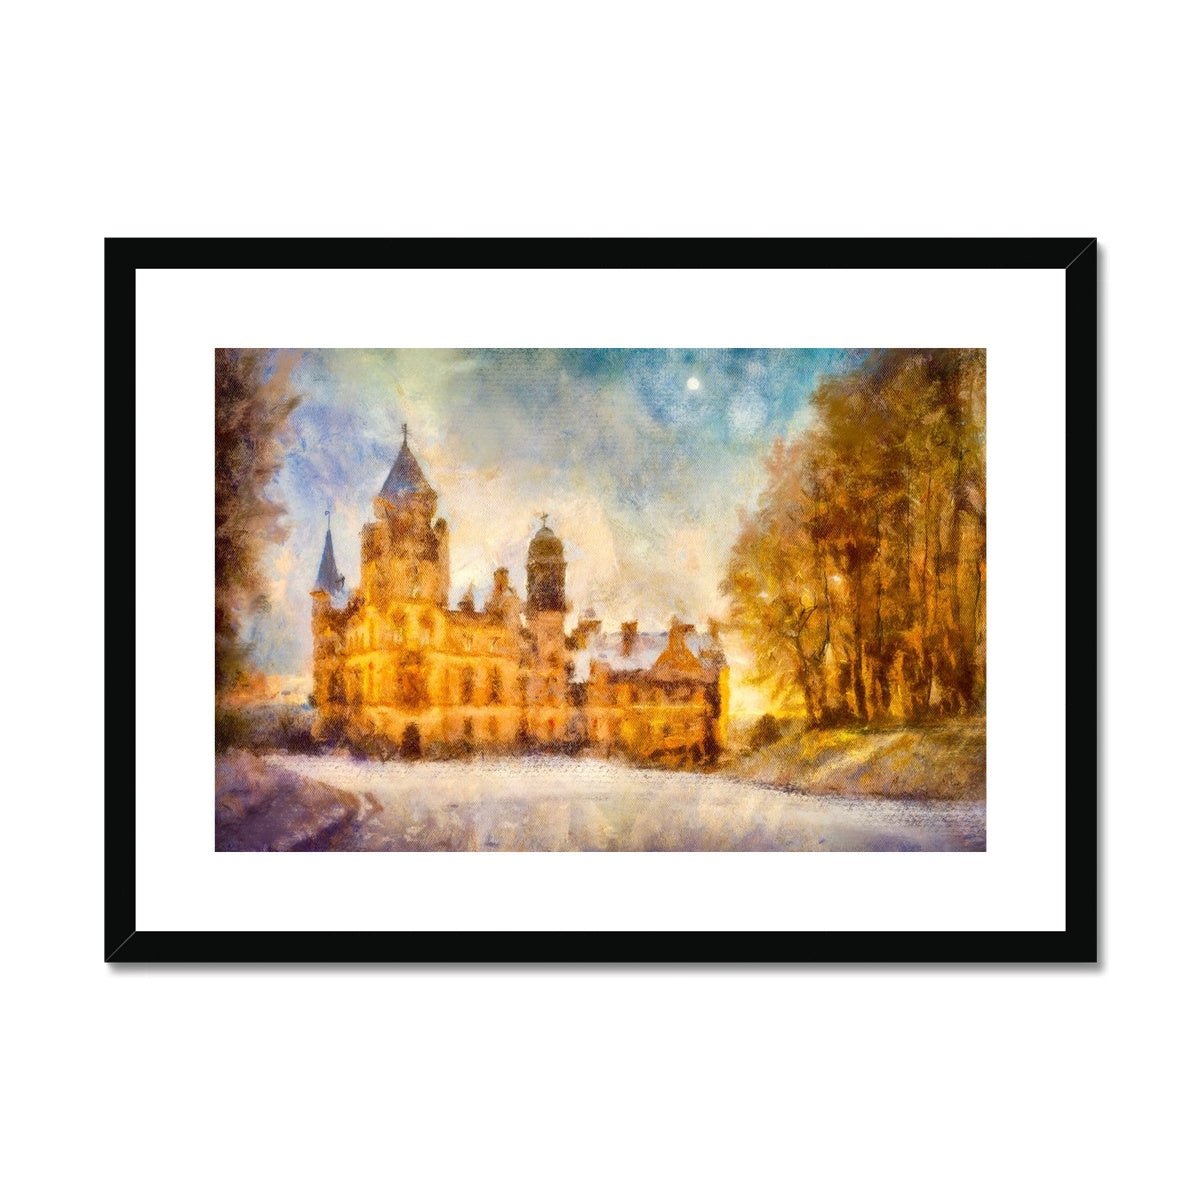 Dunrobin Castle Moonlight Painting | Framed & Mounted Prints From Scotland-Framed & Mounted Prints-Historic & Iconic Scotland Art Gallery-A2 Landscape-Black Frame-Paintings, Prints, Homeware, Art Gifts From Scotland By Scottish Artist Kevin Hunter